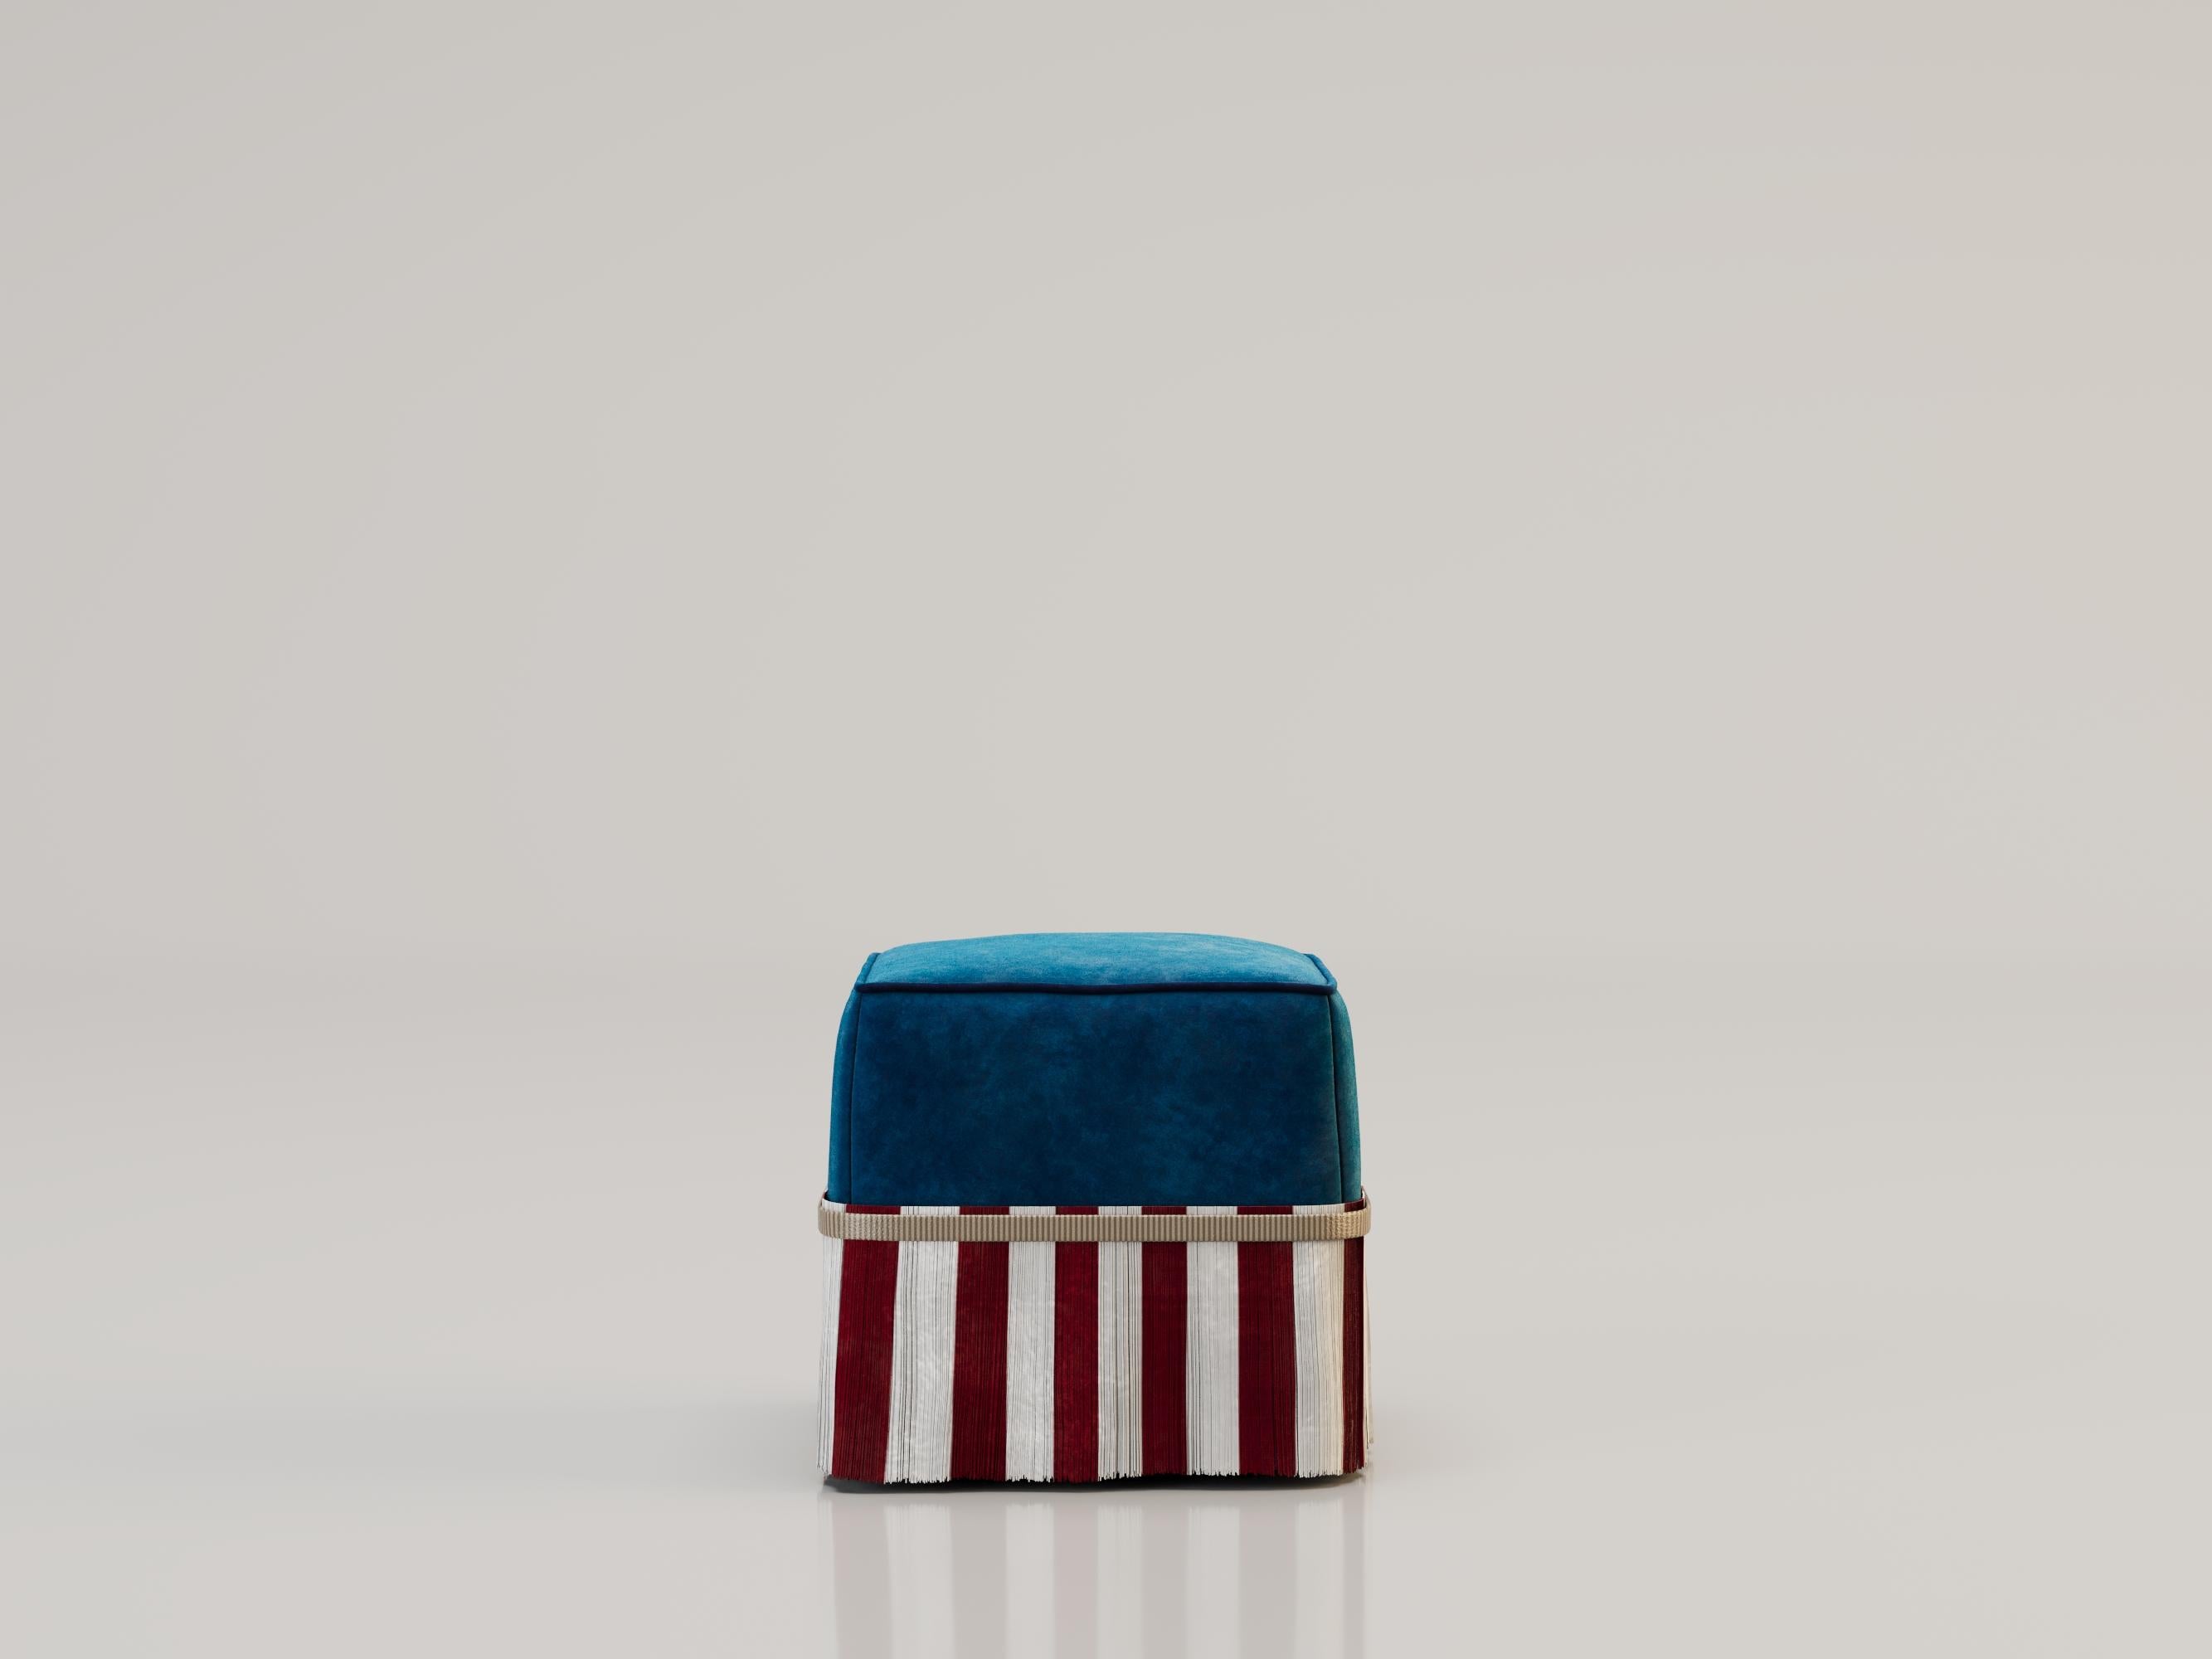 LE MODERNE Ottoman by Alexandre Ligios

Velvet

L 49 x H 42 x D 40

The fringed velvet poufs offer luxurious elegance and bohemian charm to your space. Available in several designs, each with its own distinctive character, these poufs are perfect